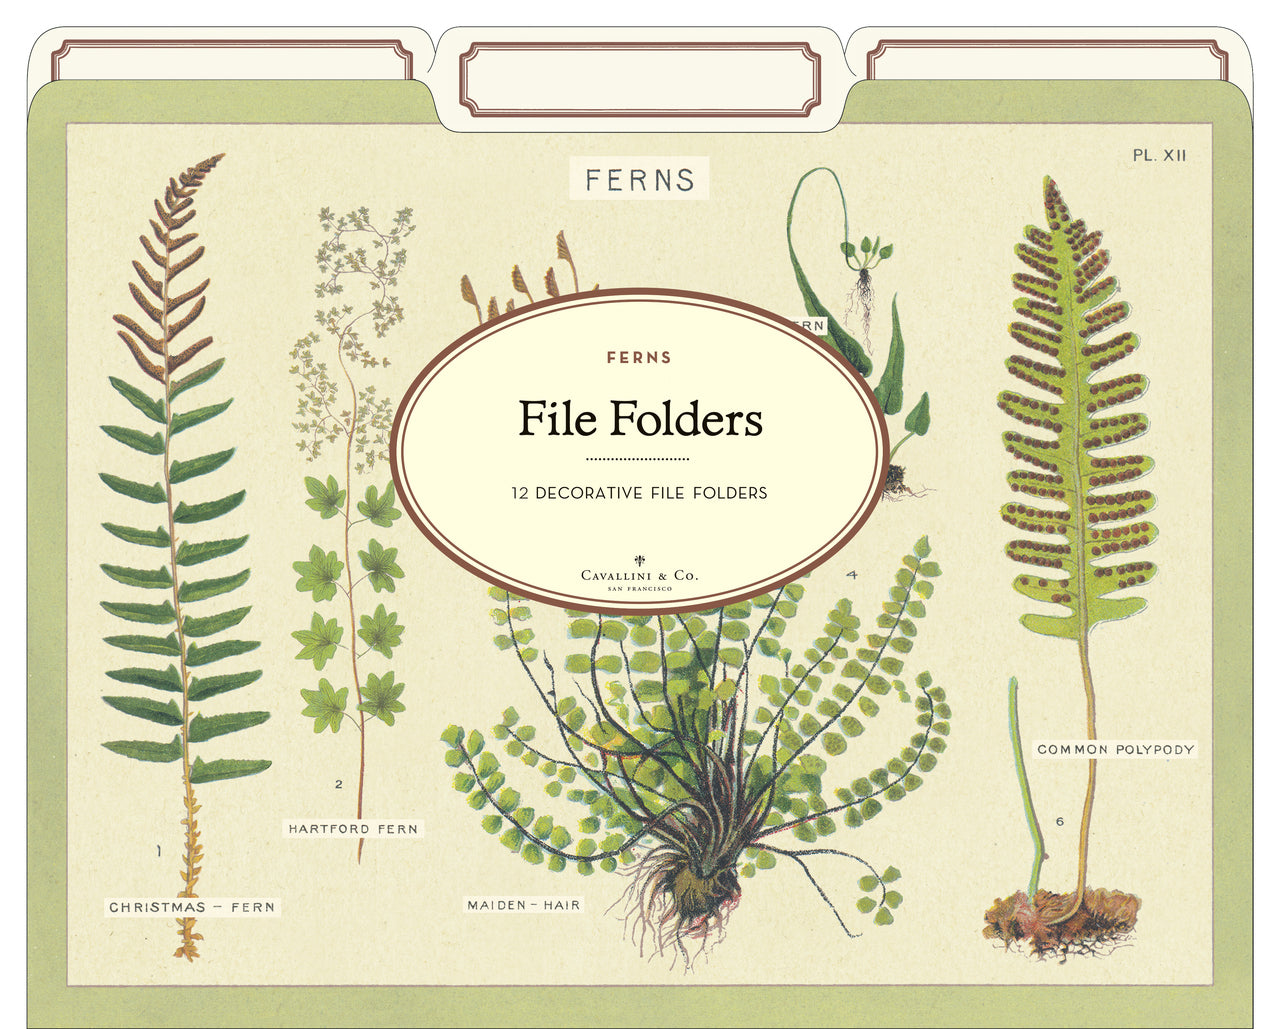 If you enjoy Cavallini's other floral themed file folders such as Succulents, Wildflowers, or Botany, then their new Fern File Folder set is for you. 